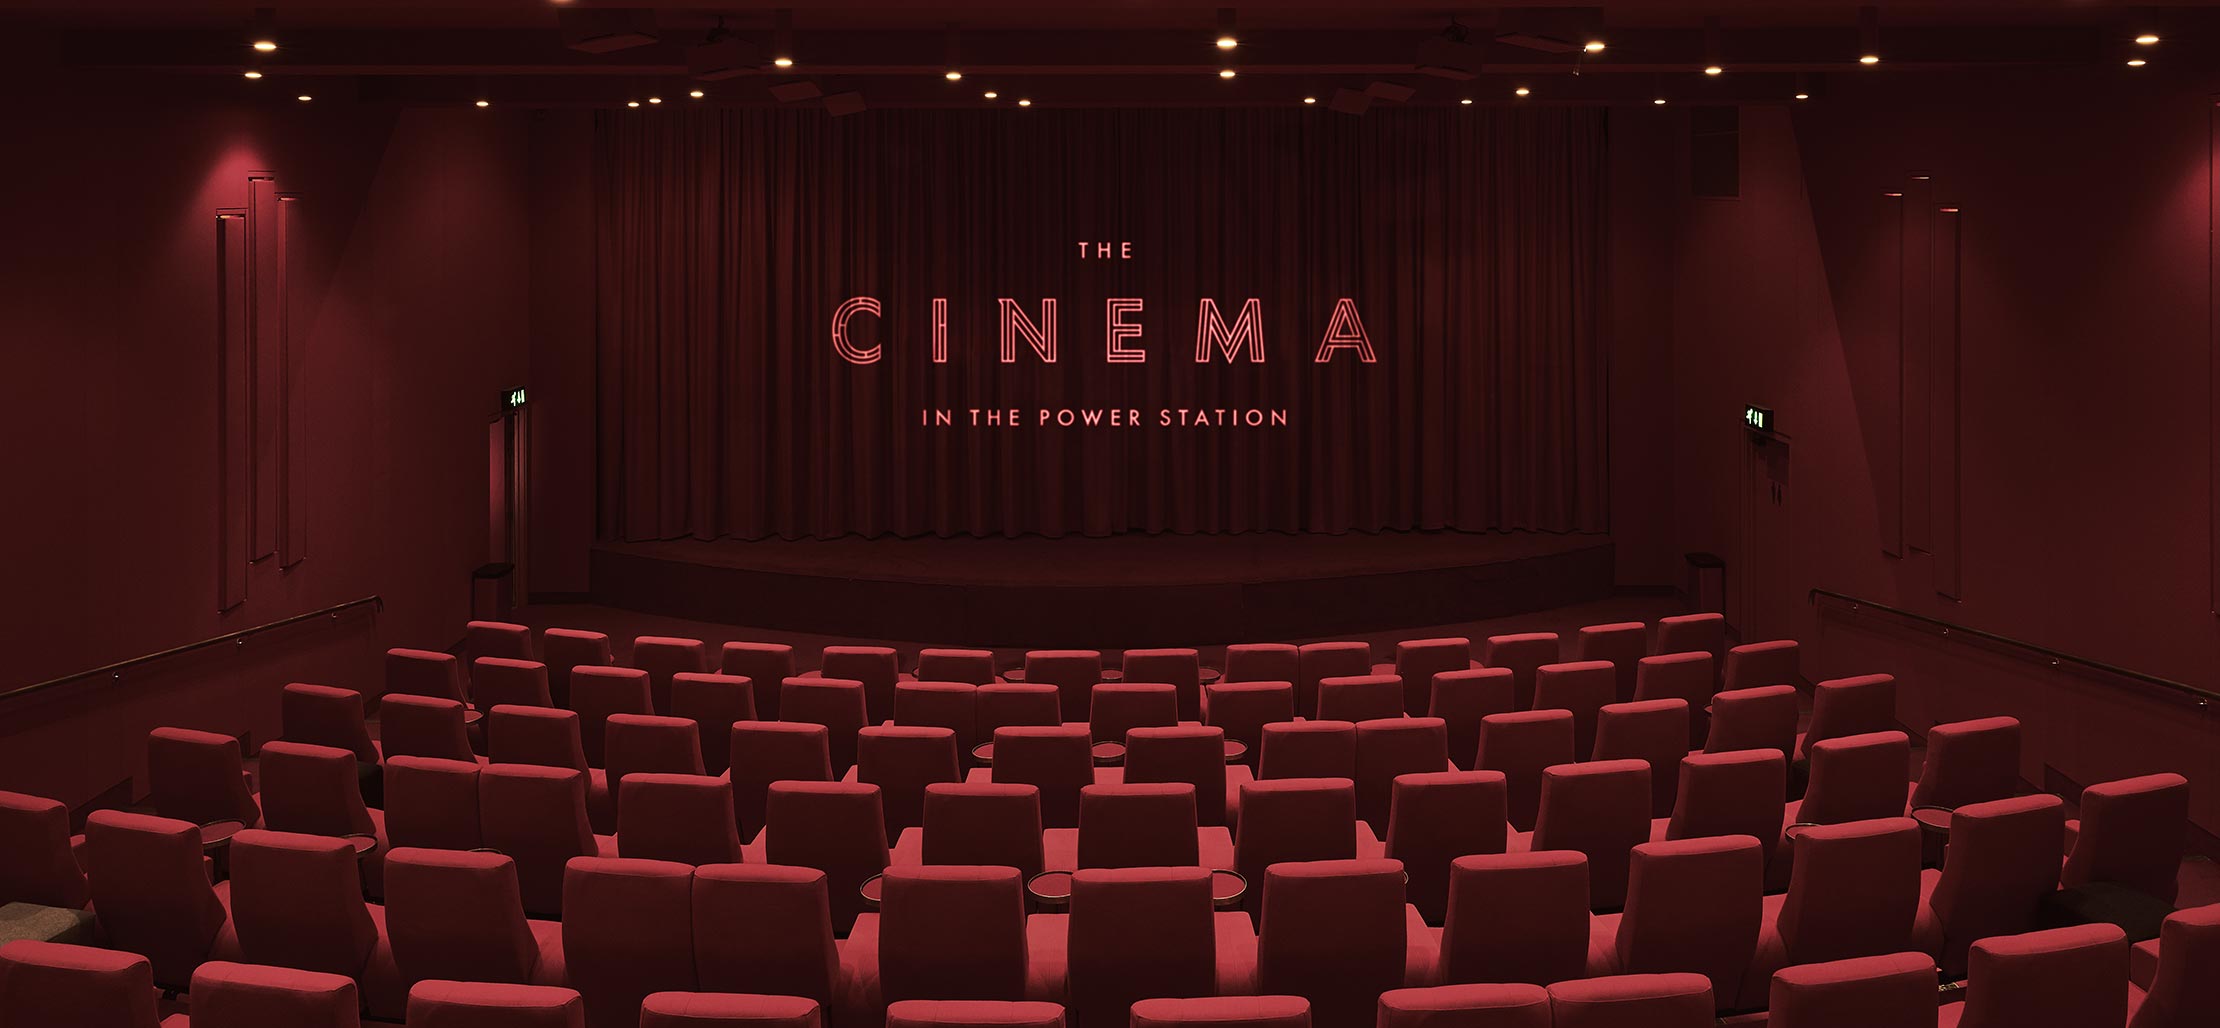 The Cinema in The Power Station Image